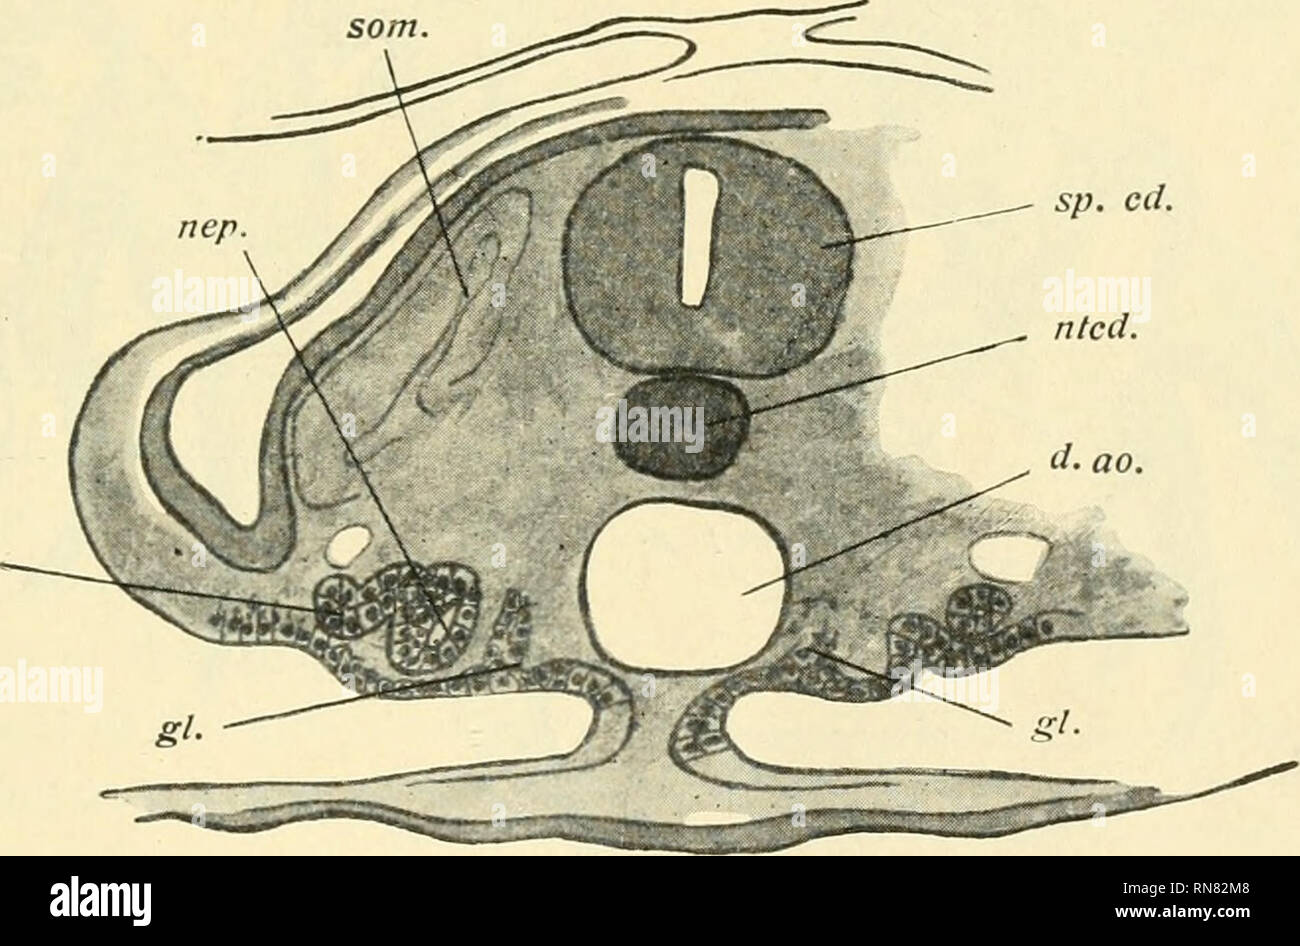 . Anatomischer Anzeiger. Anatomy, Comparative; Anatomy, Comparative. pr. d. sp. cd. Fig. IX. sp. cd. pr. d.. Fig. X. each side). In the Dogfish the change was simplified owing to the insignificance of a vascular glomus. See figs. XI, XII and XIII. The pronephros in Chrysemys is thus confined to segments YII to X: in rather late embryos it appears as a number of tubules (from 6 to 8) opening at one end into the extreme anterior region of the coelom and at the other into the pronephric (segmental) duct. The vascular glomus also remains until a comparatively late'em- bryonic stage as a much broke Stock Photo